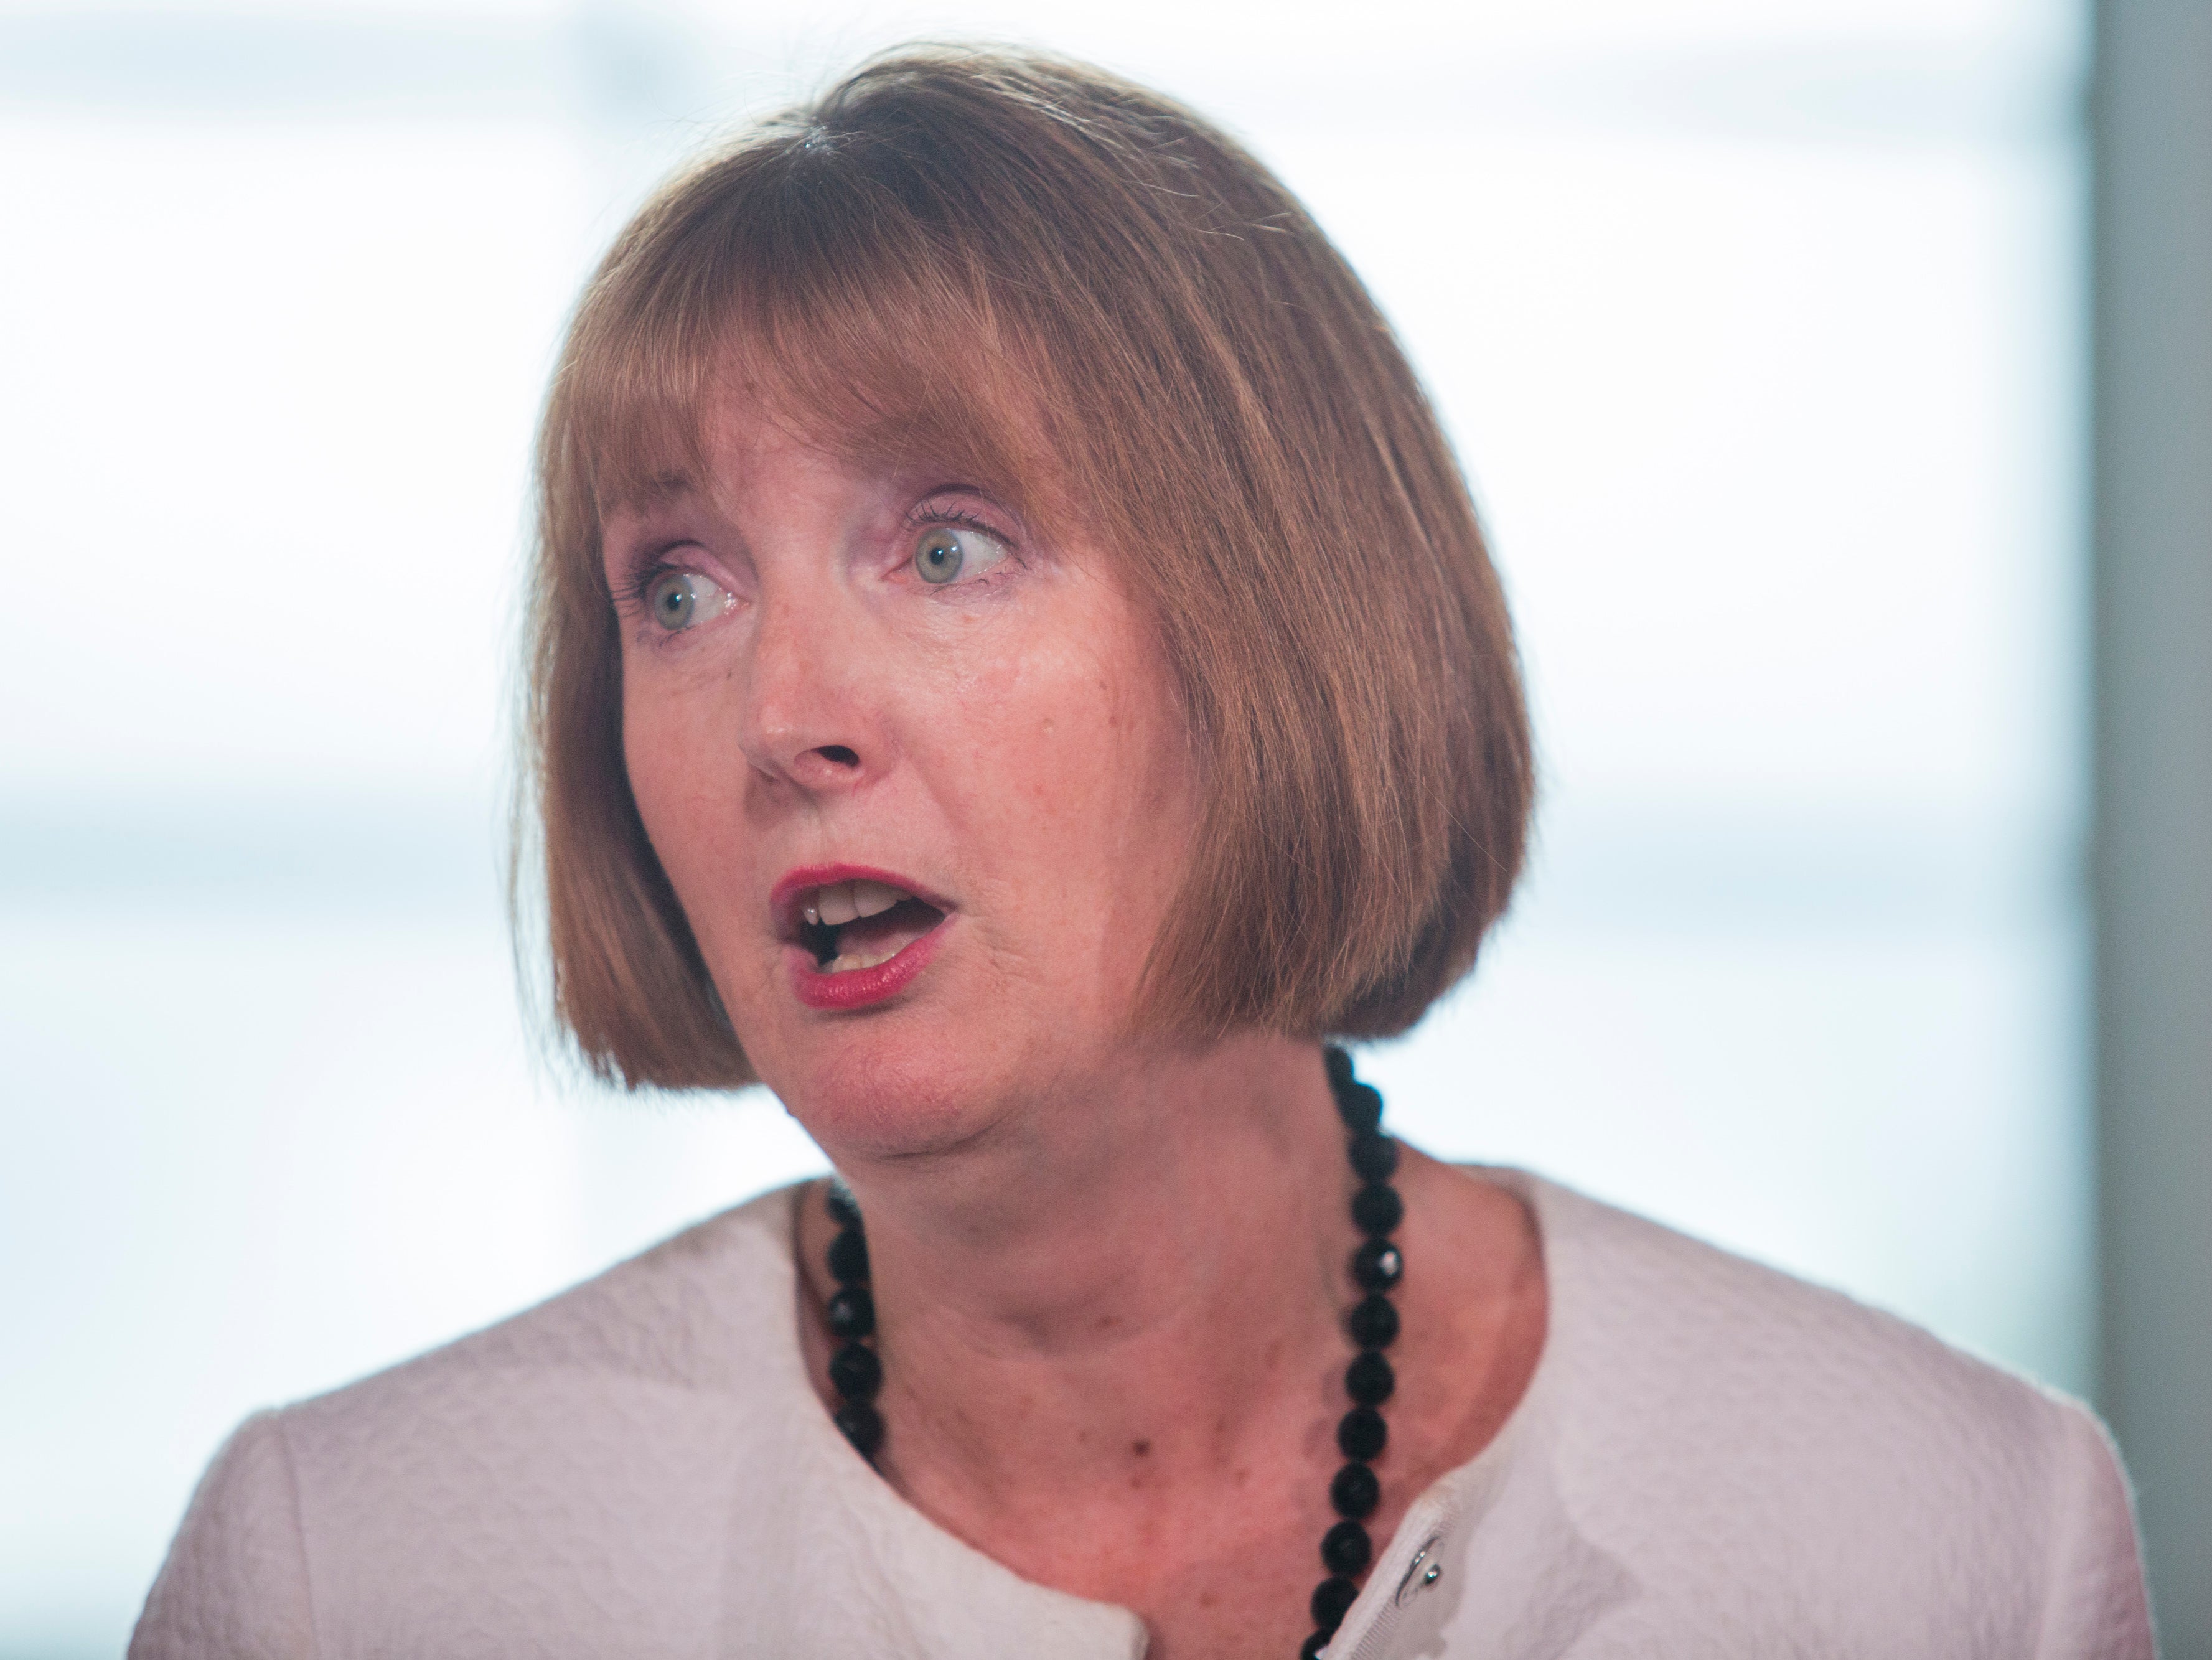 Harriet Harman called on Ofcom to release data on older people in broadcasting this week